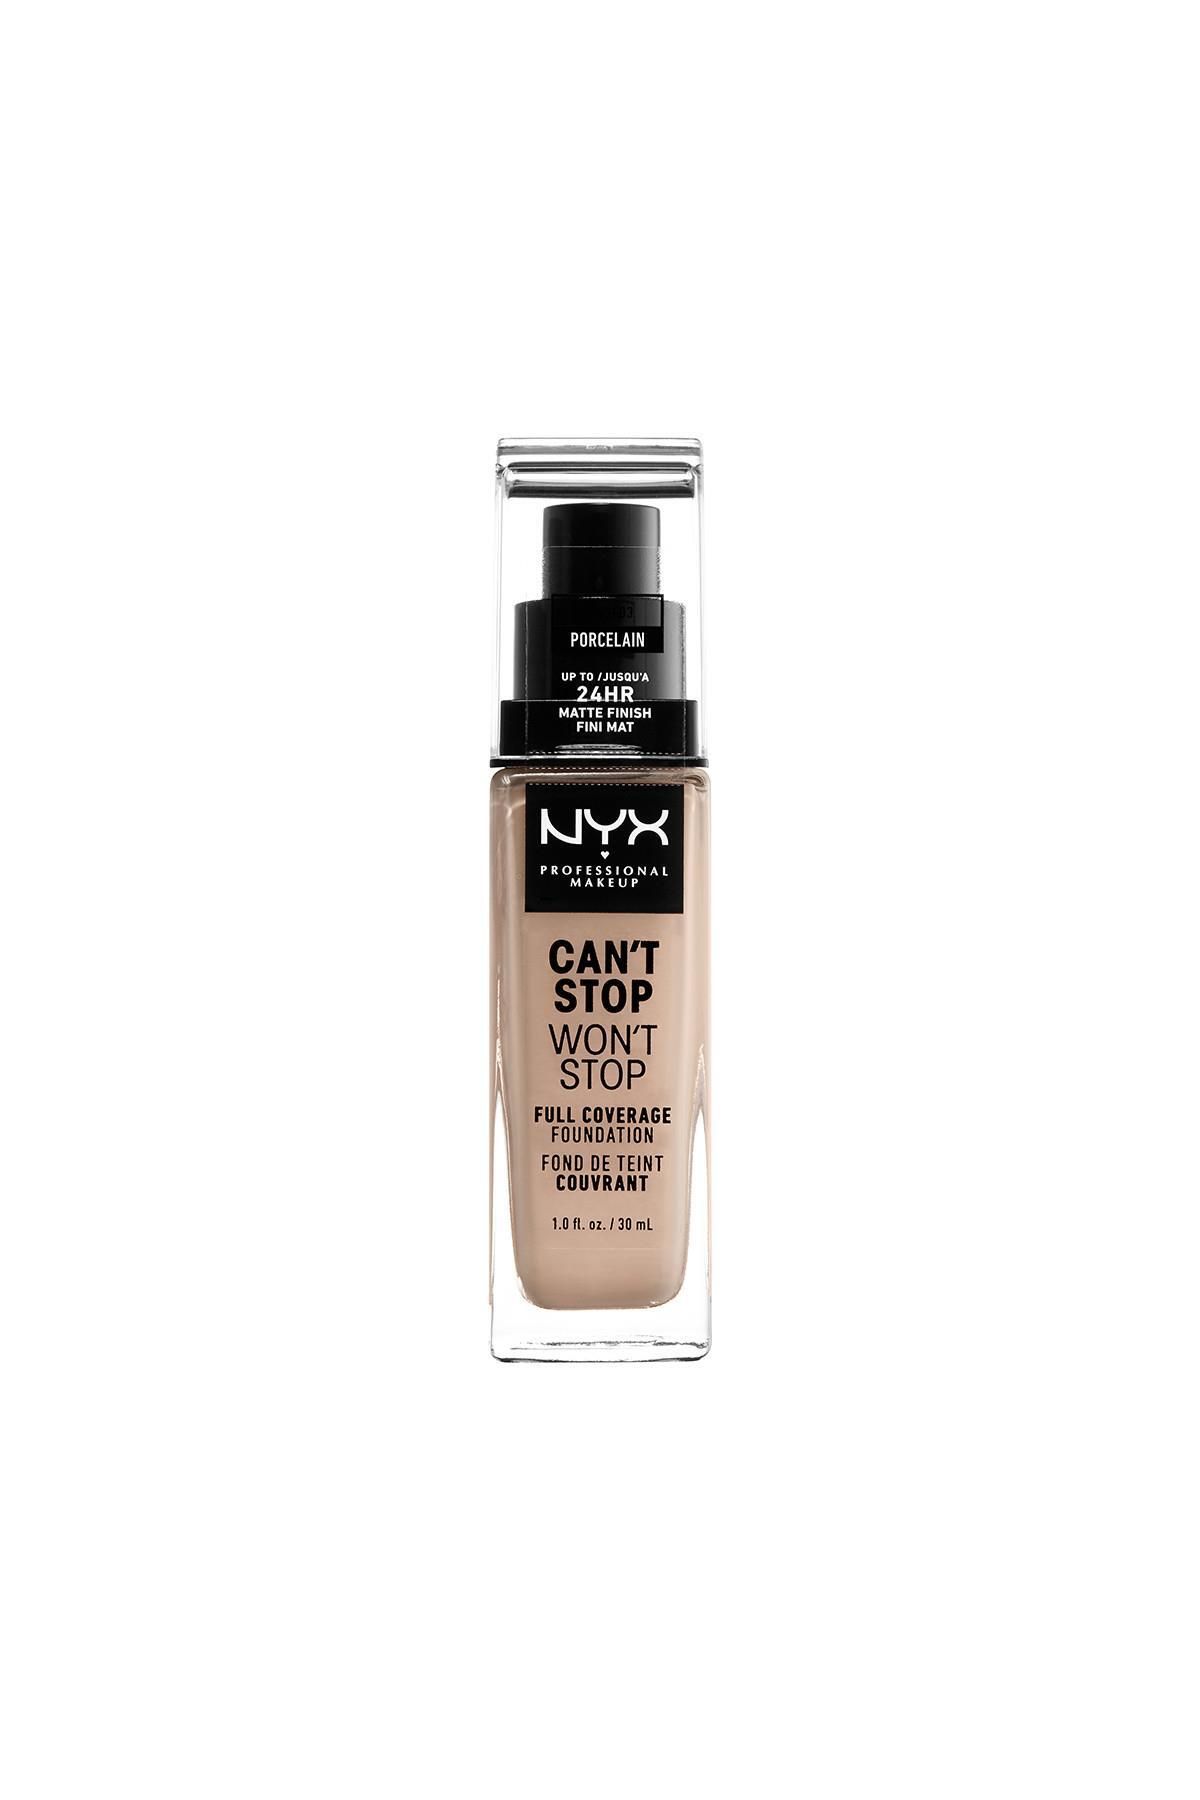 NYX Professional Makeup Fondöten - Can't Stop Won't Stop Full Coverage Foundation 03 Porcelain 30 ml 800897157180